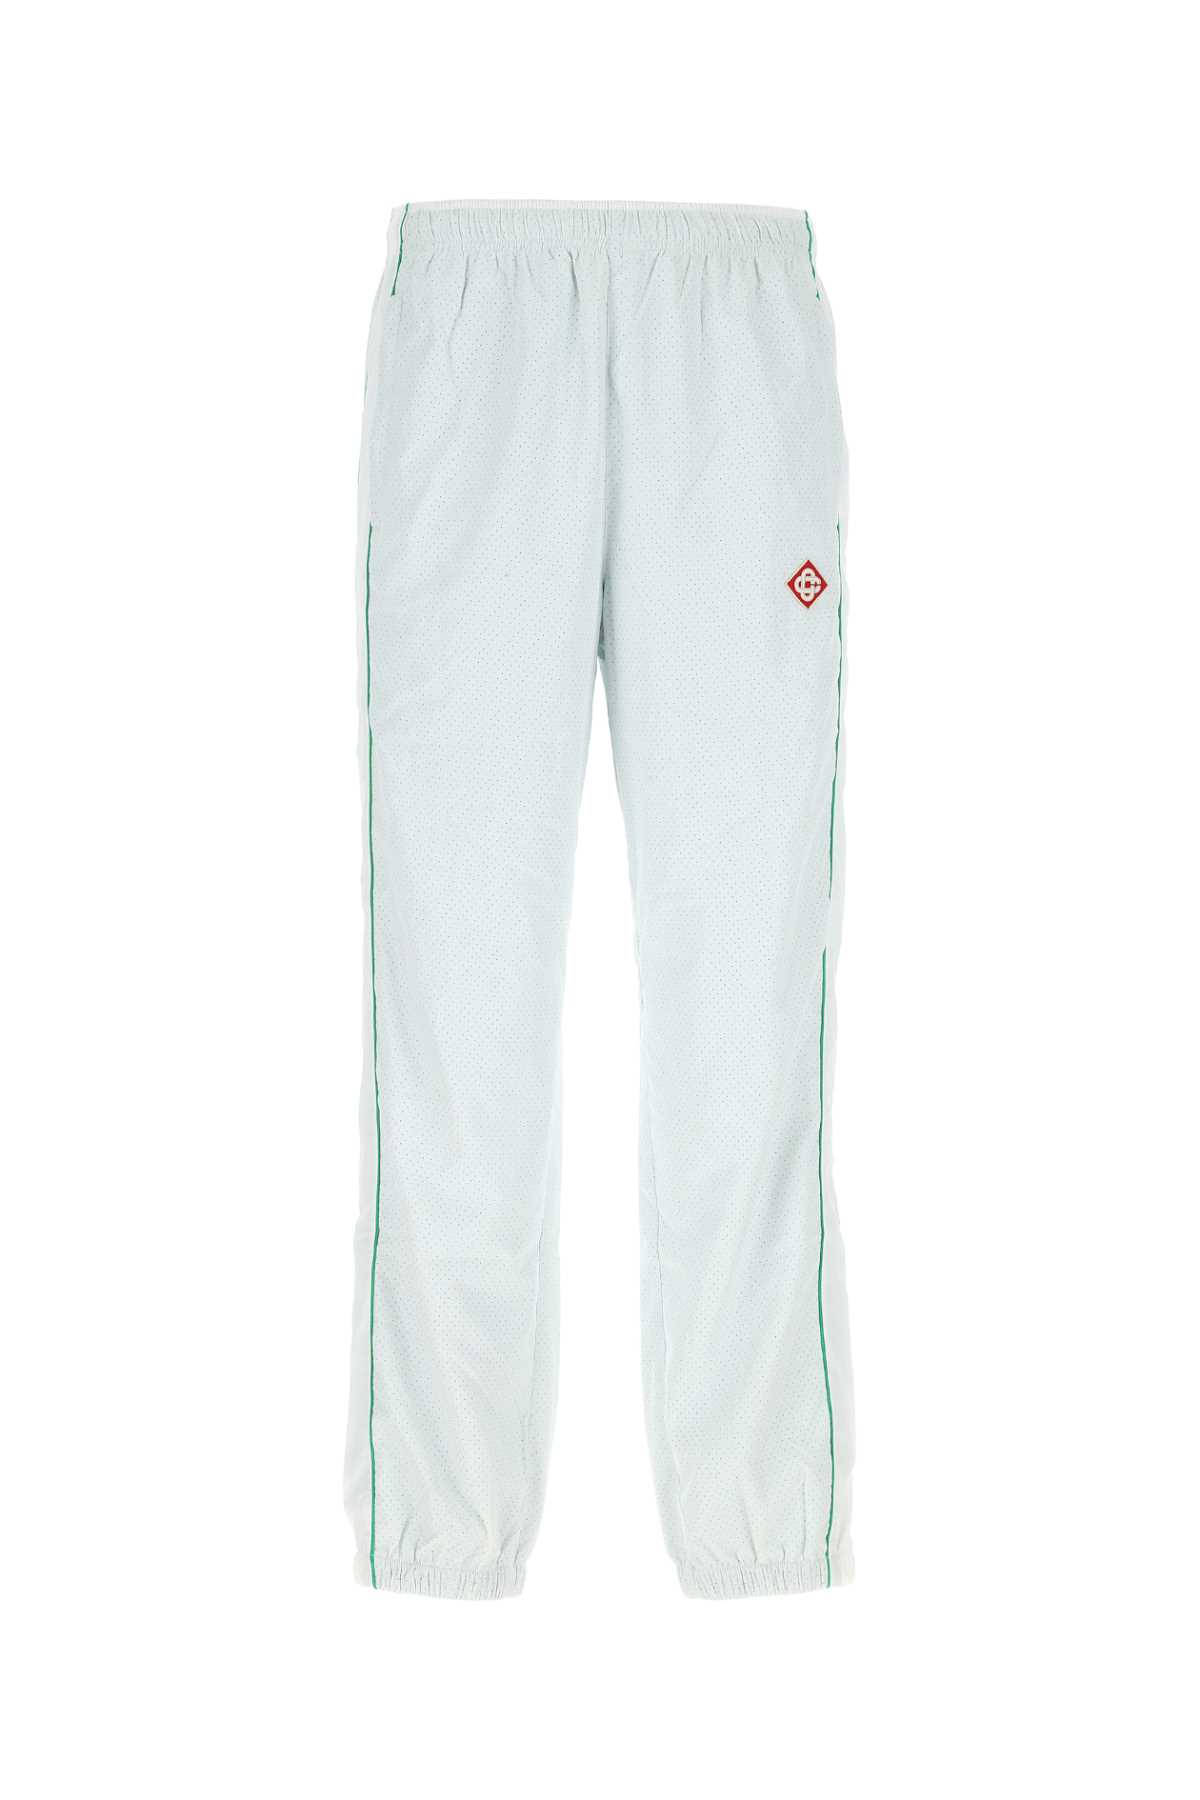 White Polyester Joggers